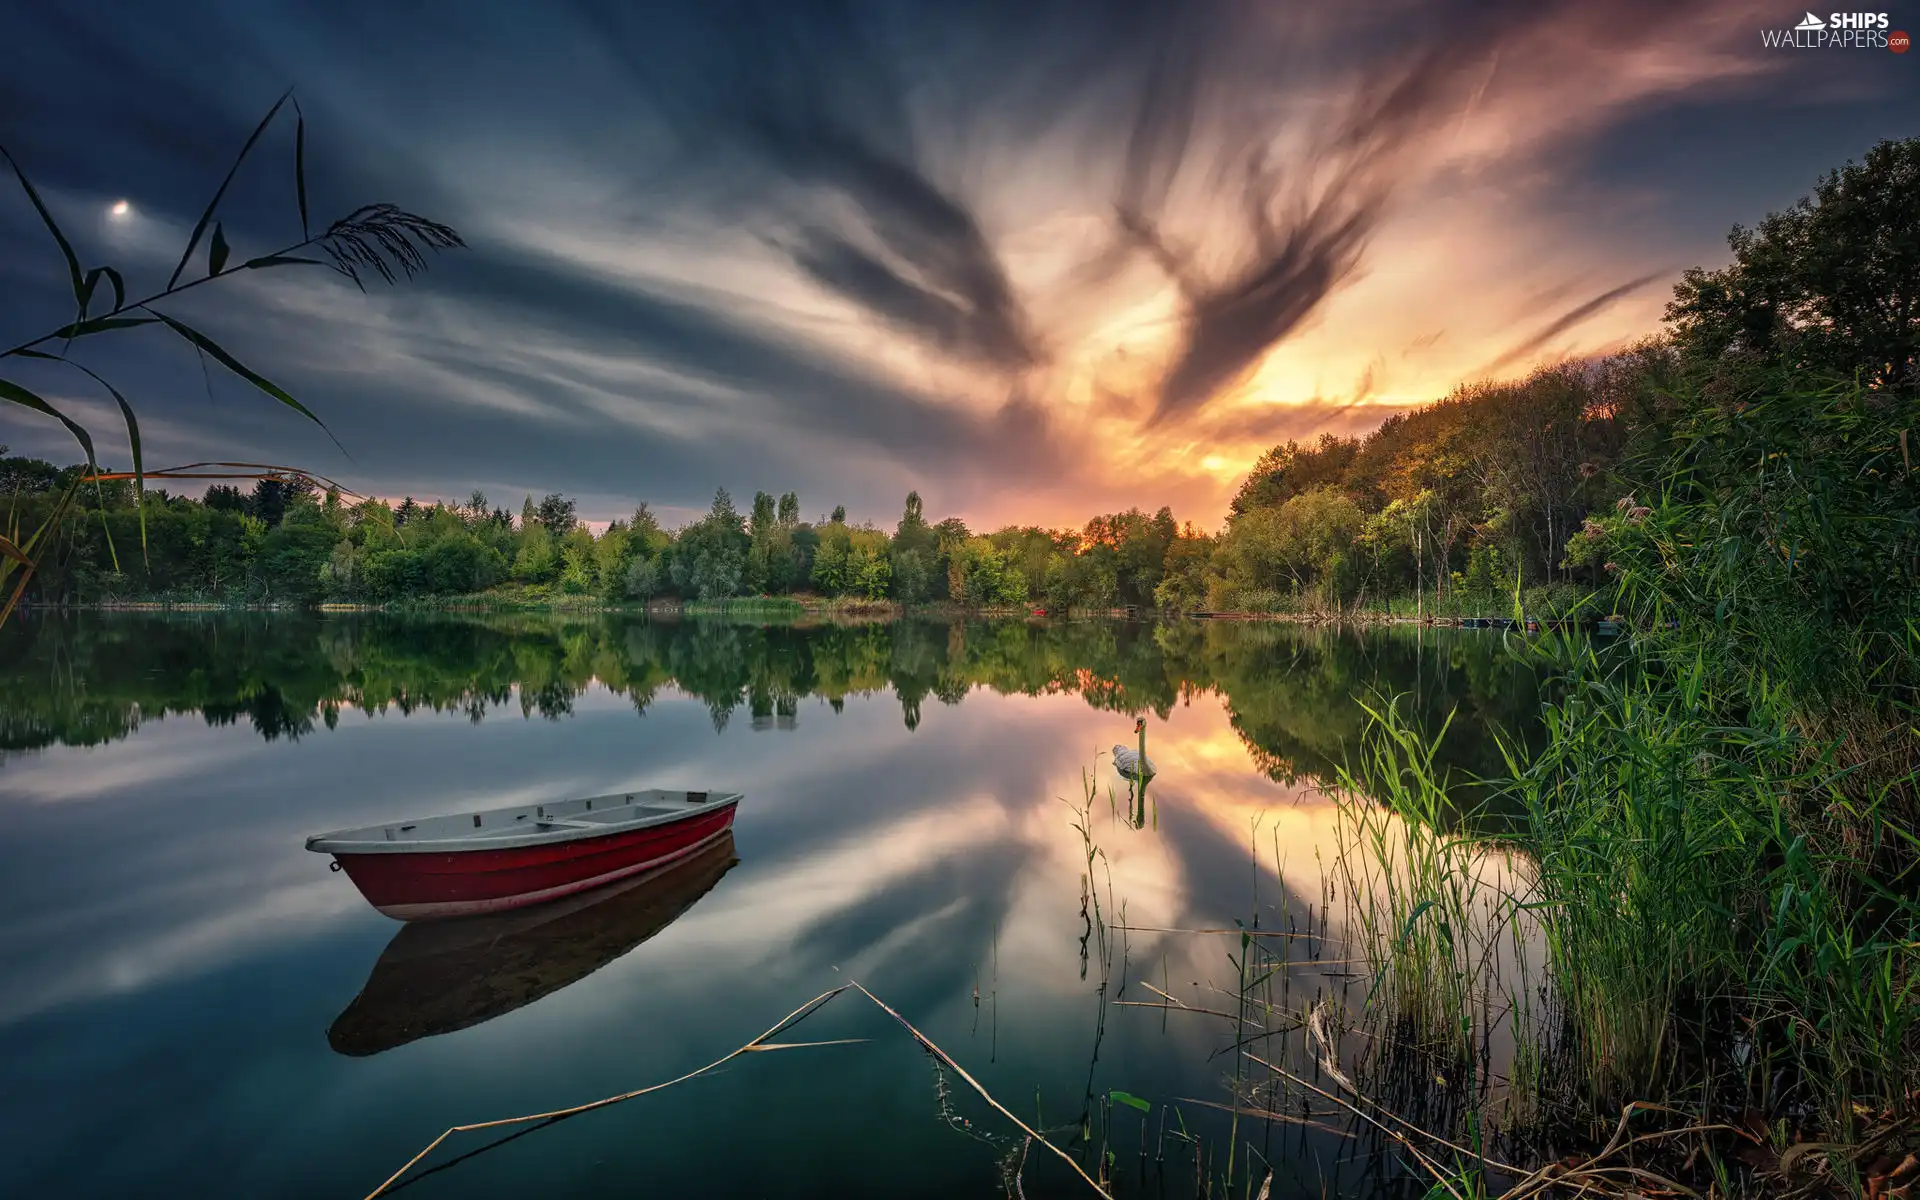 Swans, grass, Sunrise, trees, clouds, Boat, lake, viewes